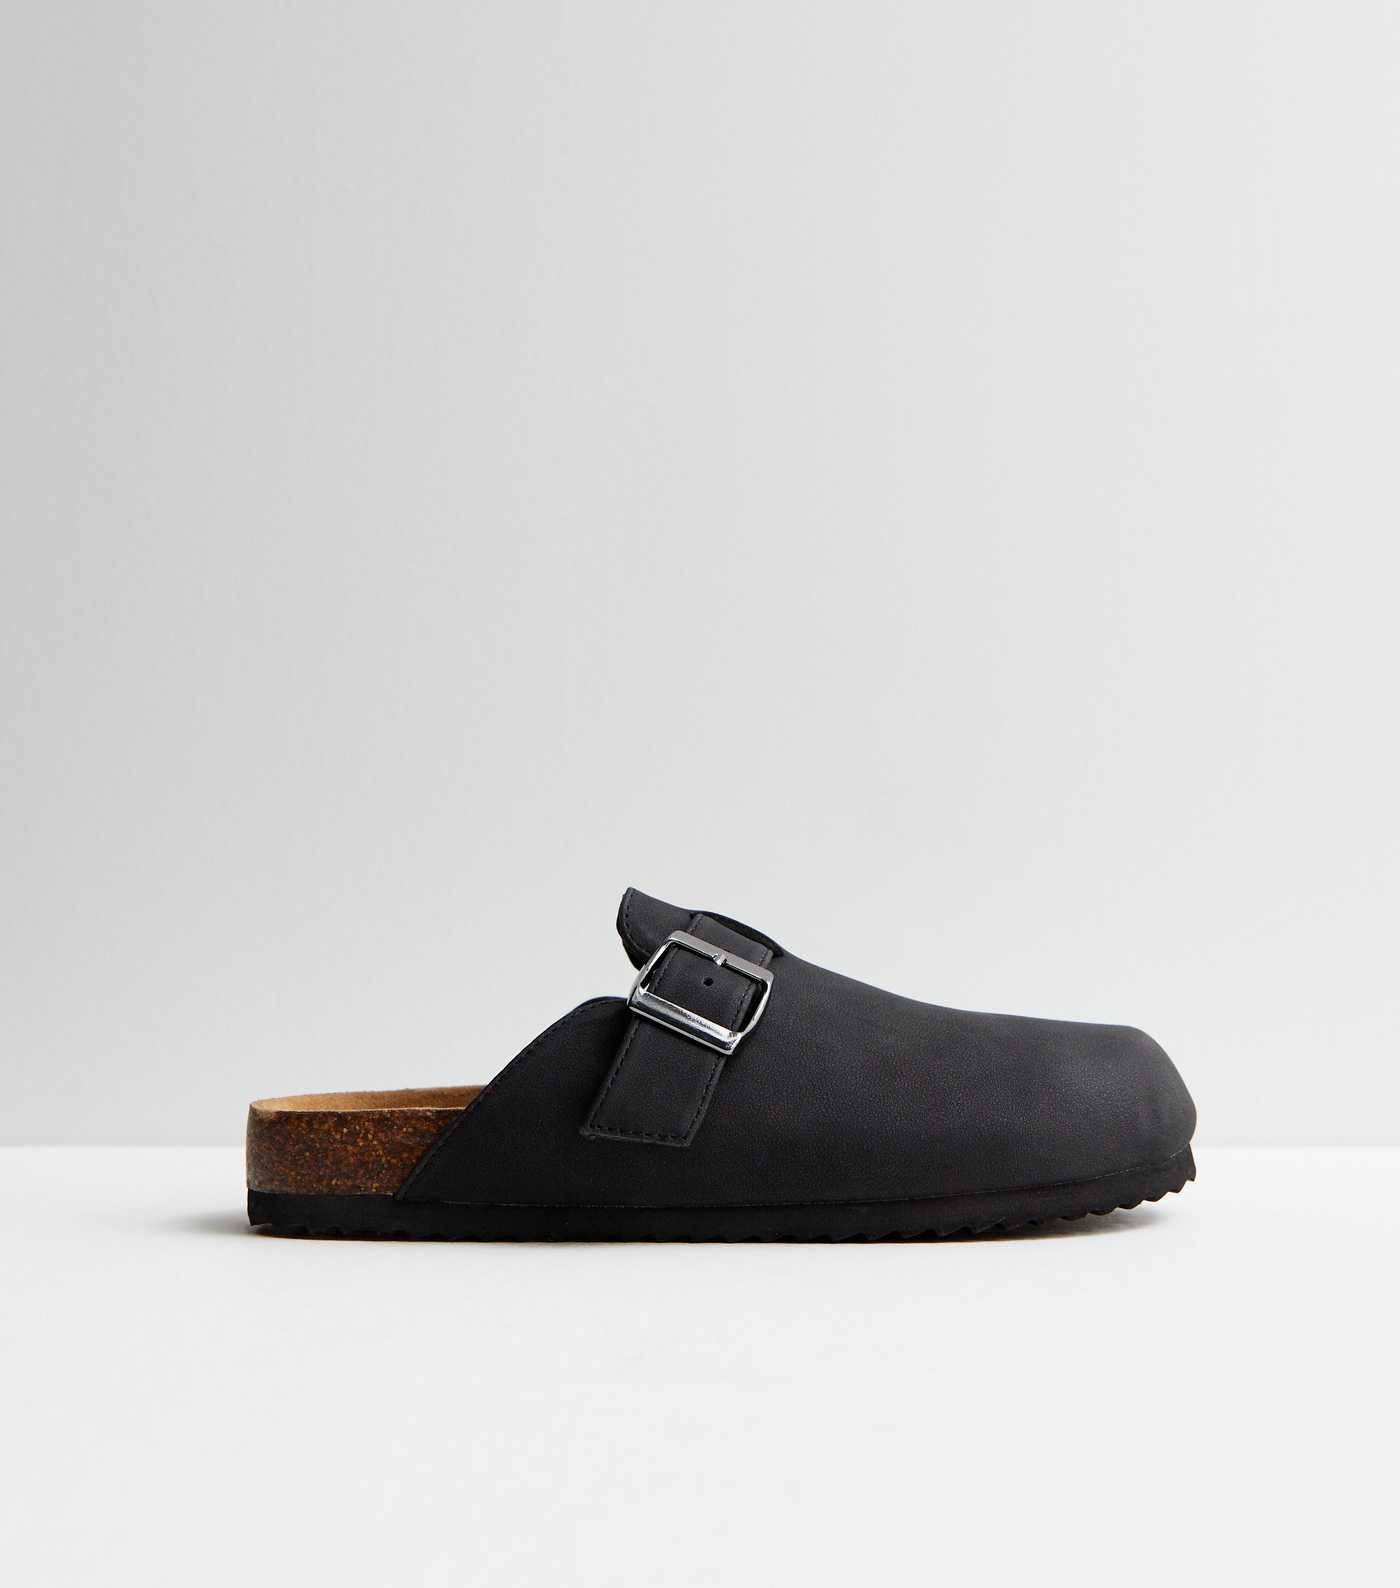 Truffle Black Buckle Footbed Mule Slippers
						
						Add to Saved Items
						Remove from Save... | New Look (UK)